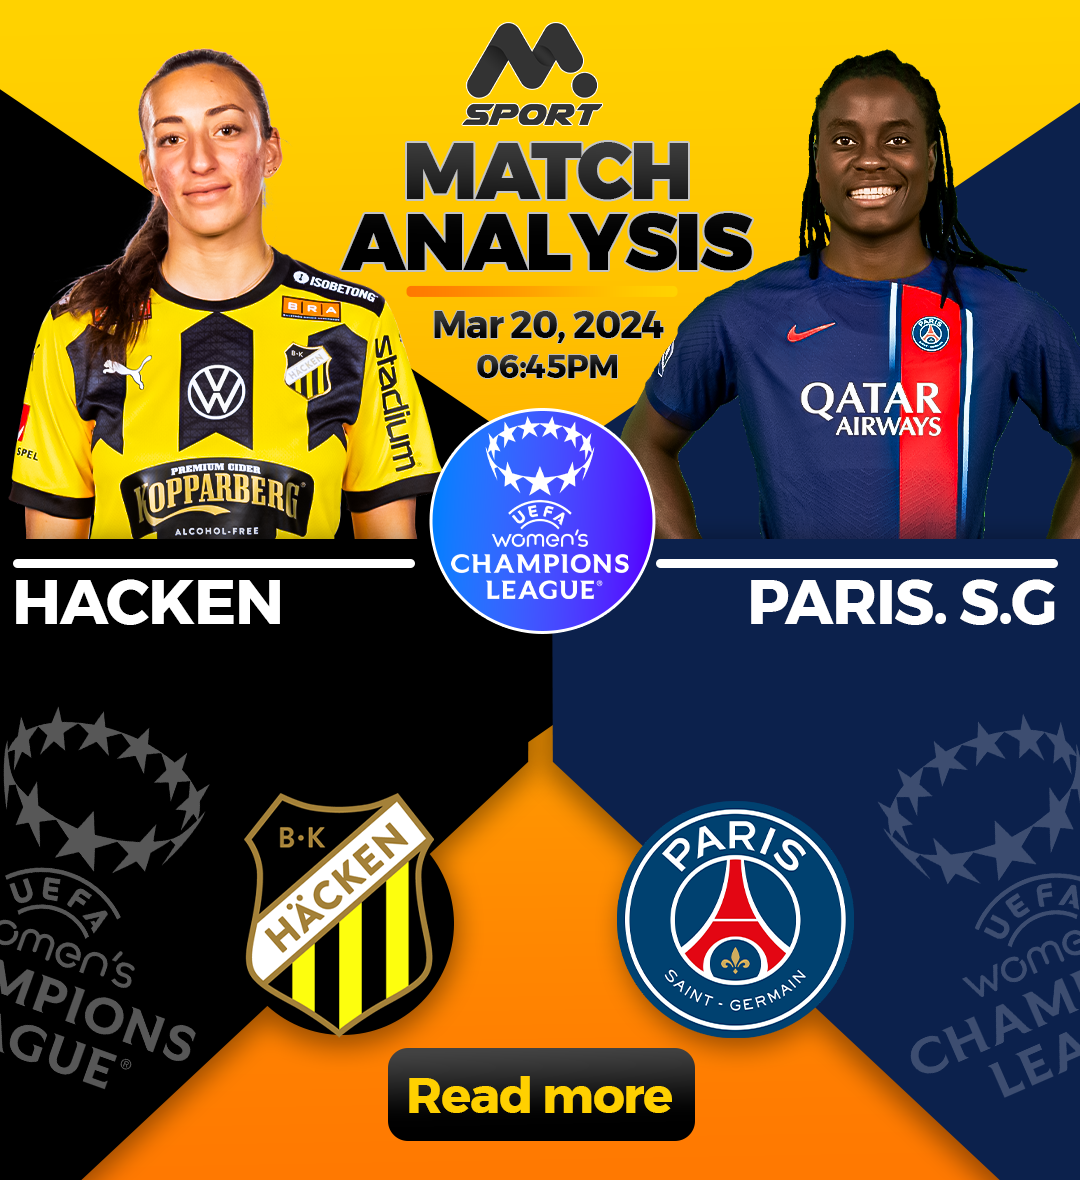 Hacken vs PSG: Can Stubborn Swedish Side that Beat Real, Beat PSG in Quarters